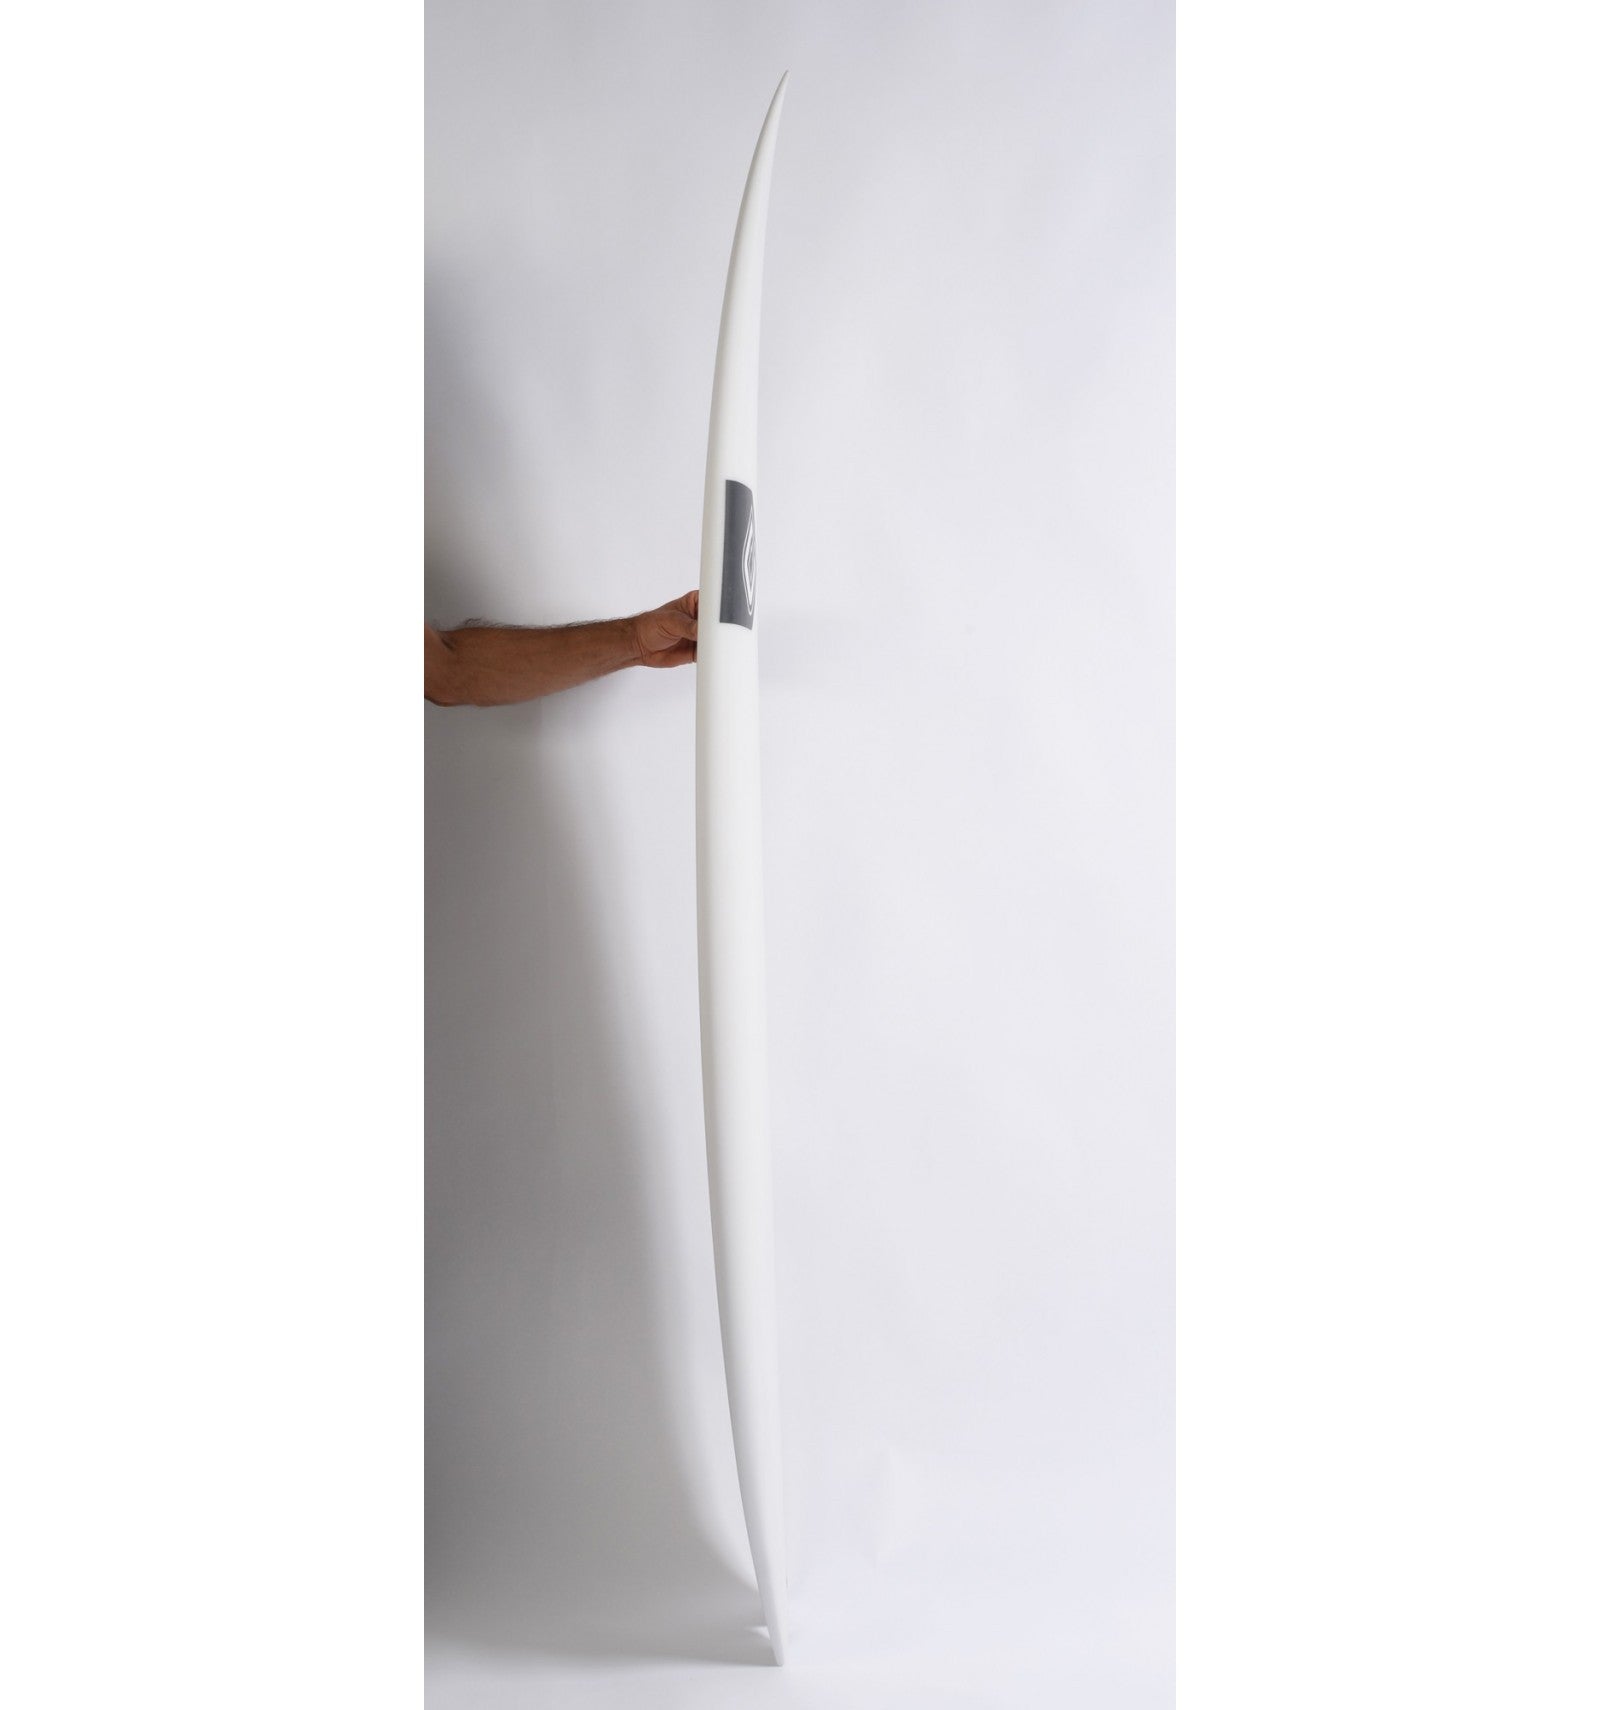 CLAYTON Surfboards - Jester Fish (PU) - Futures - 5'11